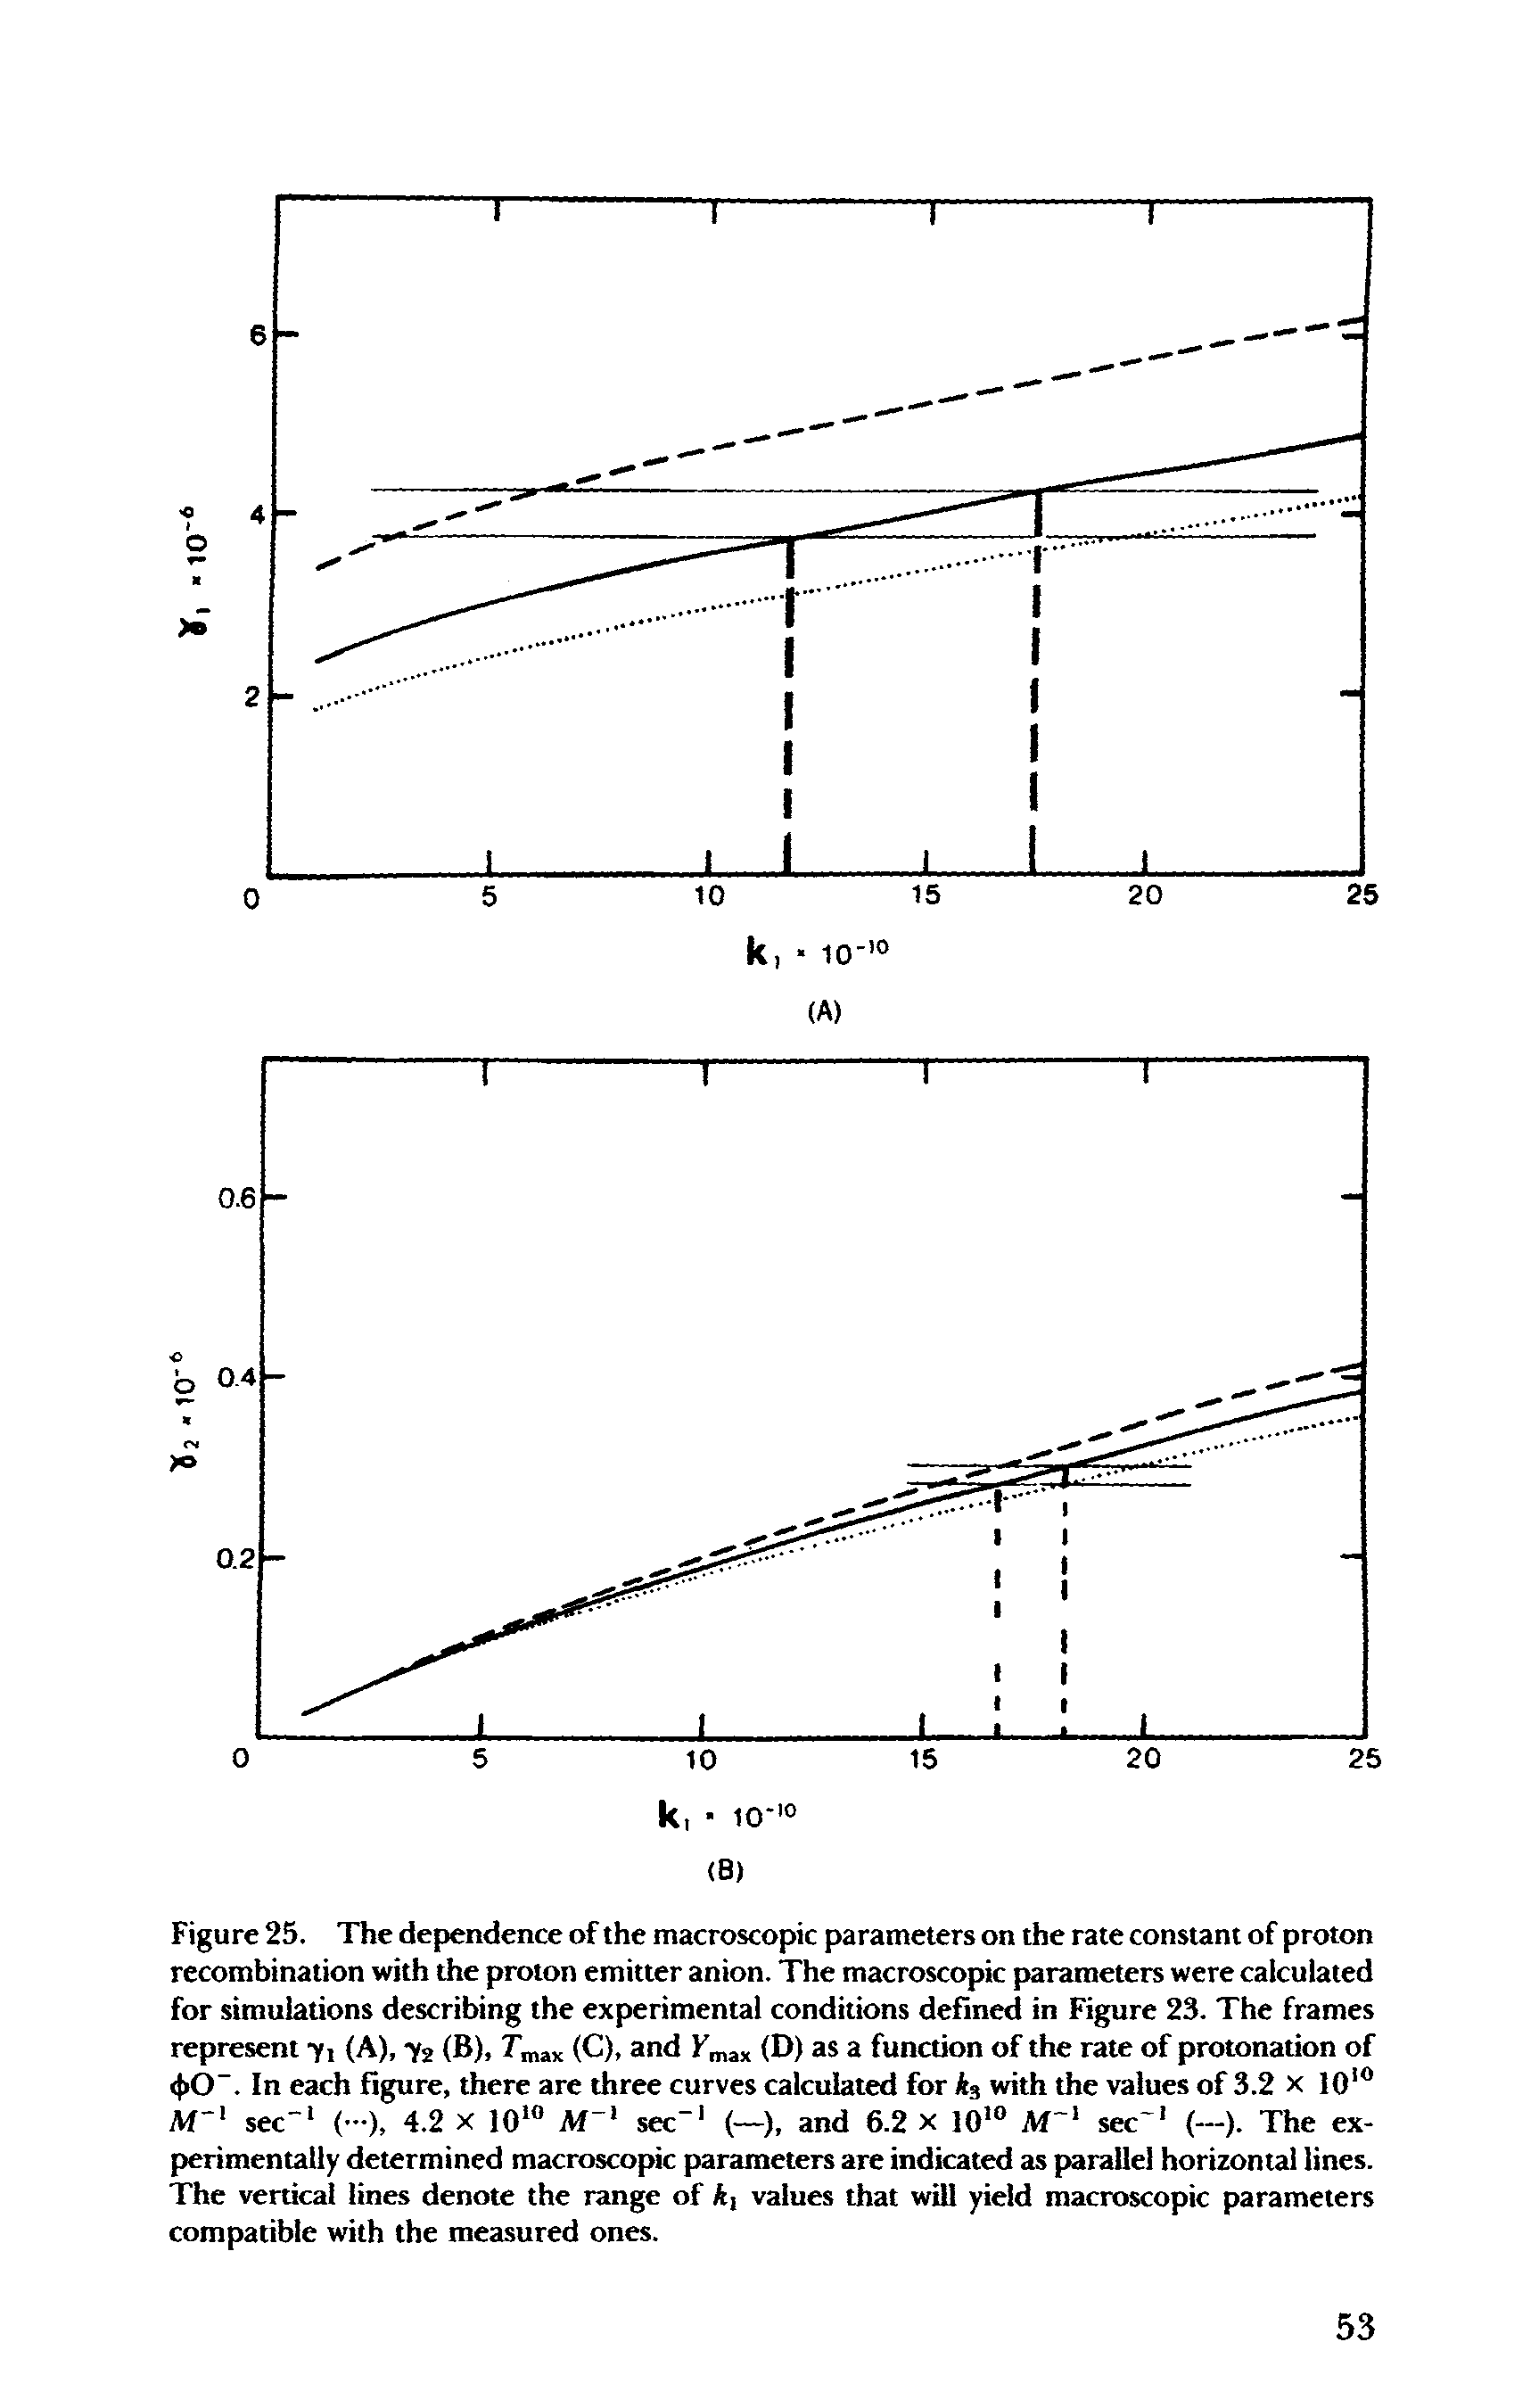 Figure 25. The dependence of the macroscopic parameters on the rate constant of proton recombination with the proton emitter anion. The macroscopic parameters were calculated for simulations describing the experimental conditions defined in Figure 23. The frames represent y, (A), y3 (B), Tmax (C), and Fmax (D) as a function of the rate of protonation of <t>CT. In each figure, there are three curves calculated for k3 with the values of 3.2 x lO10 Af"1 sec-1 ( ), 4.2 x lO10 Af"1 sec-1 (—), and 6.2 x 1010 Af"1 sec 1 (—). The experimentally determined macroscopic parameters are indicated as parallel horizontal lines. The vertical lines denote the range of A, values that will yield macroscopic parameters compatible with the measured ones.